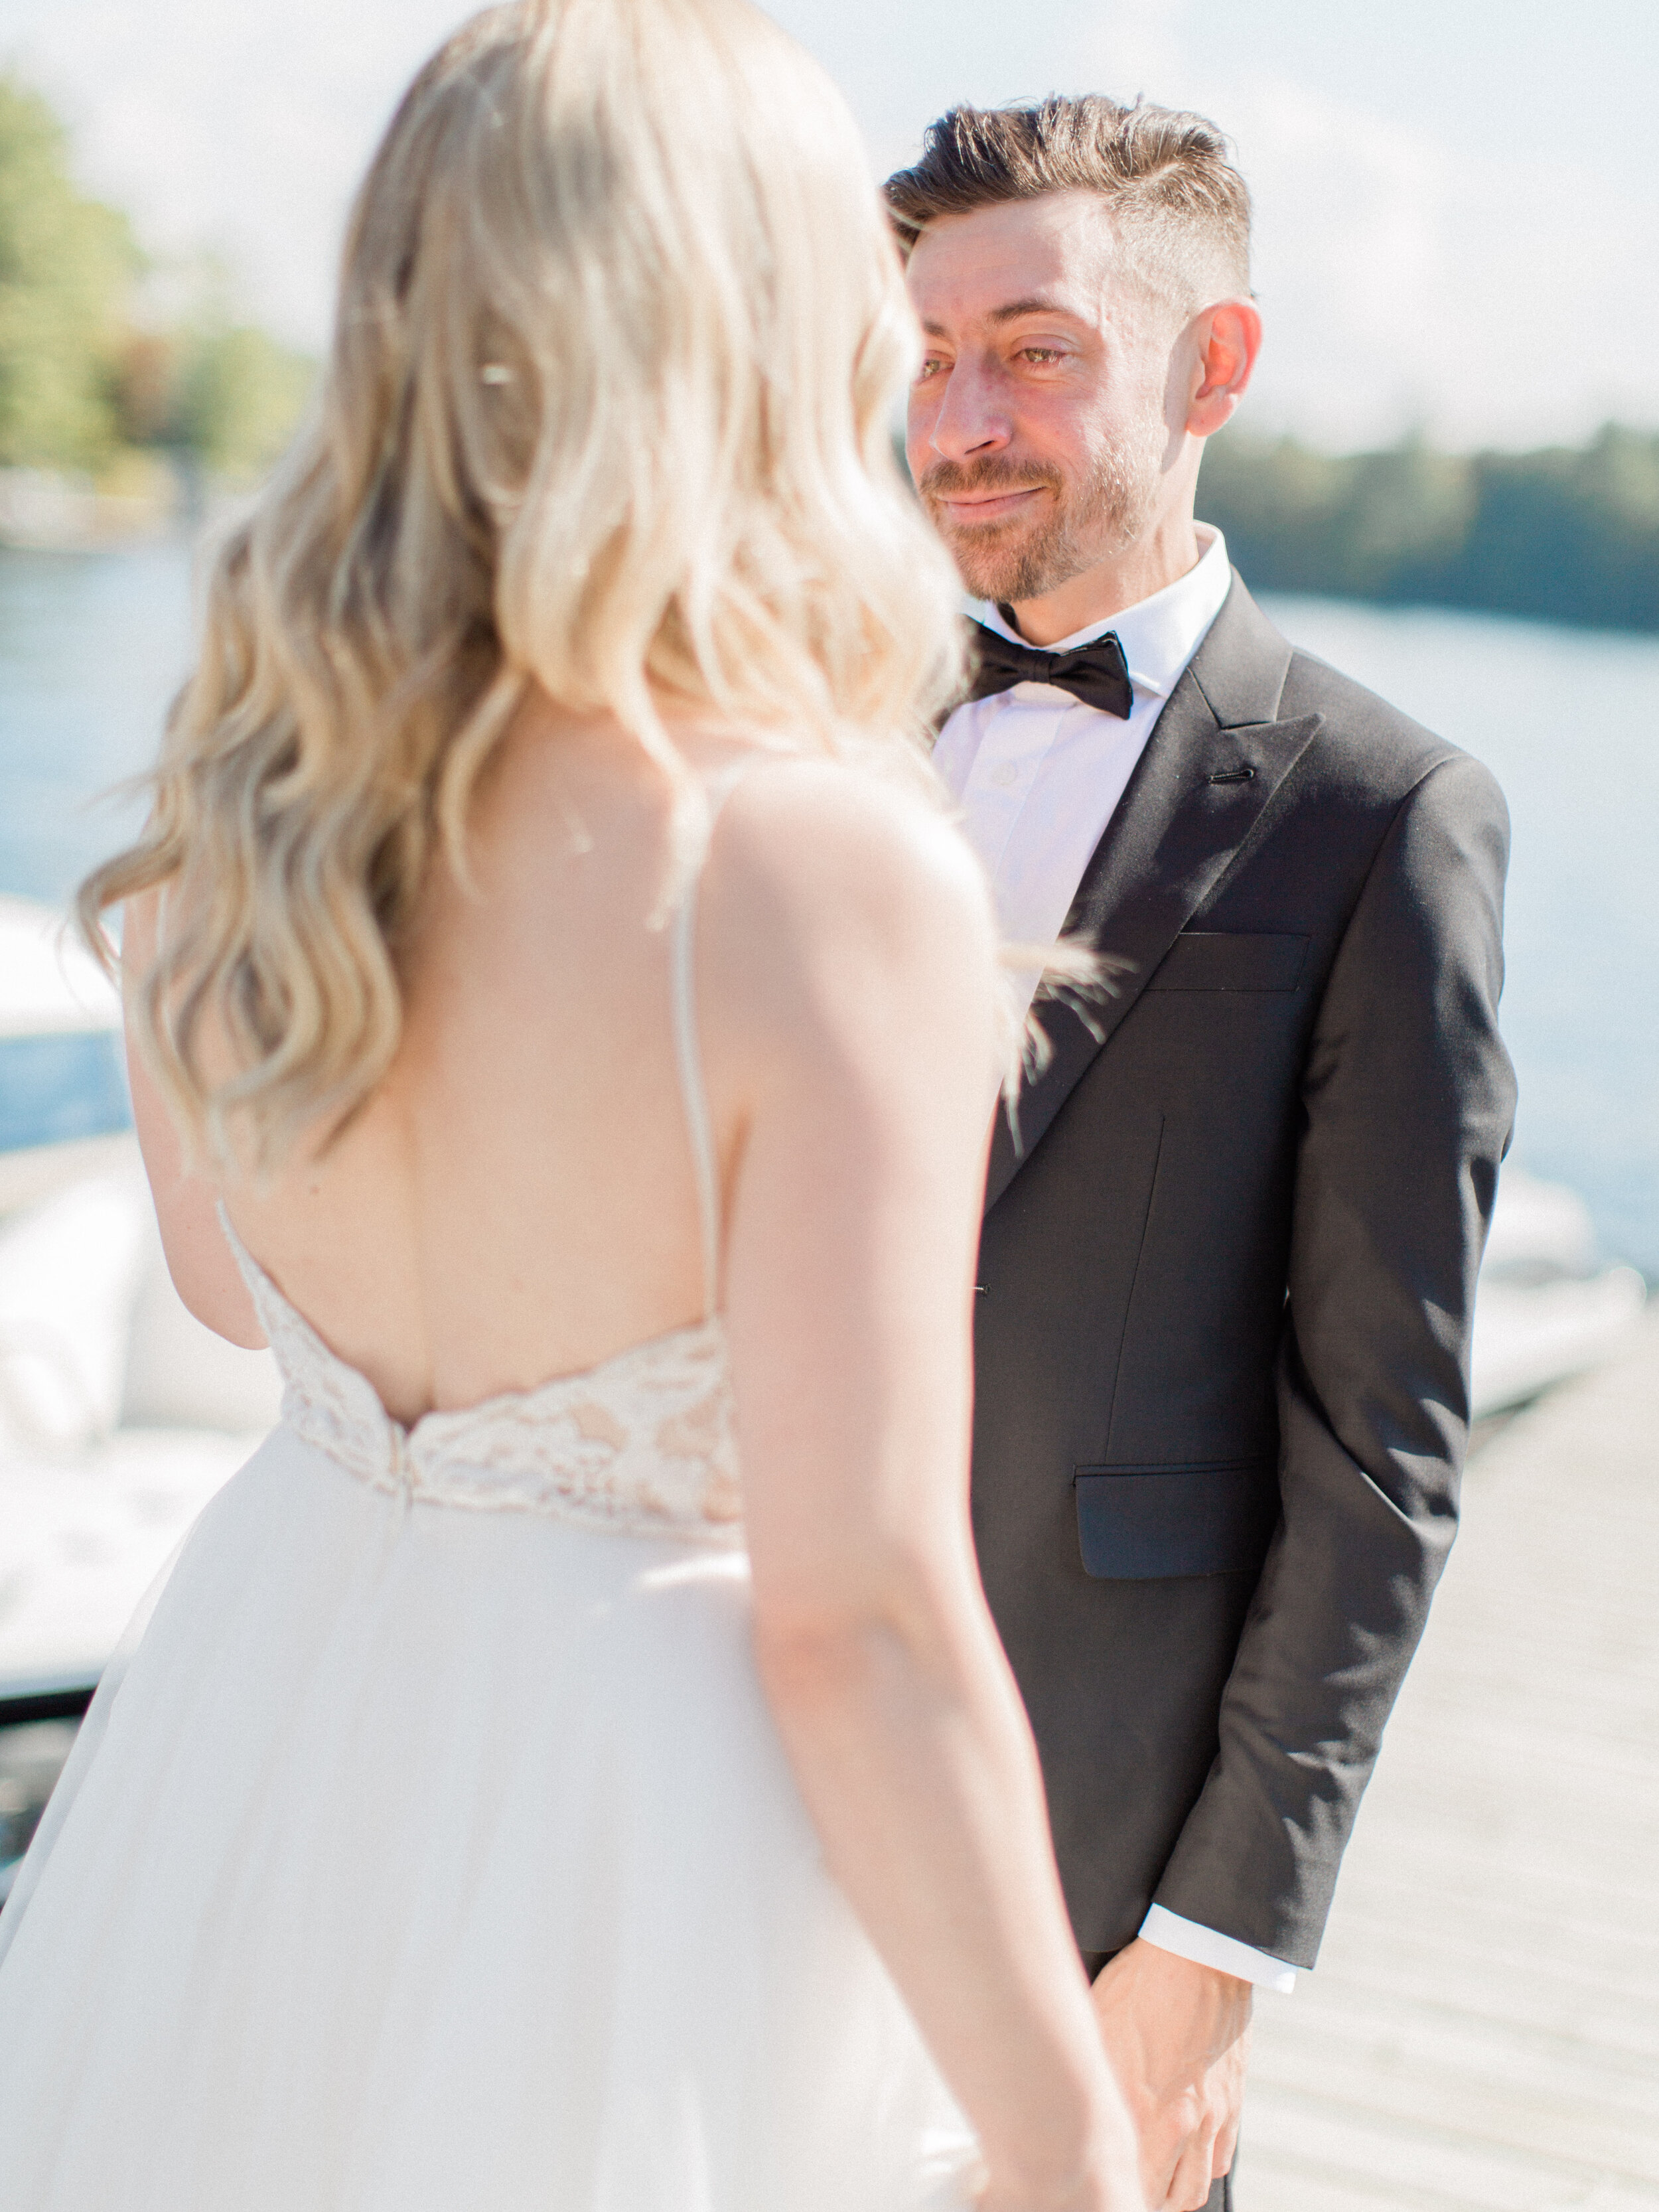 an emotional groom at getting to see his bride for the first time on their wedding day in muskoka